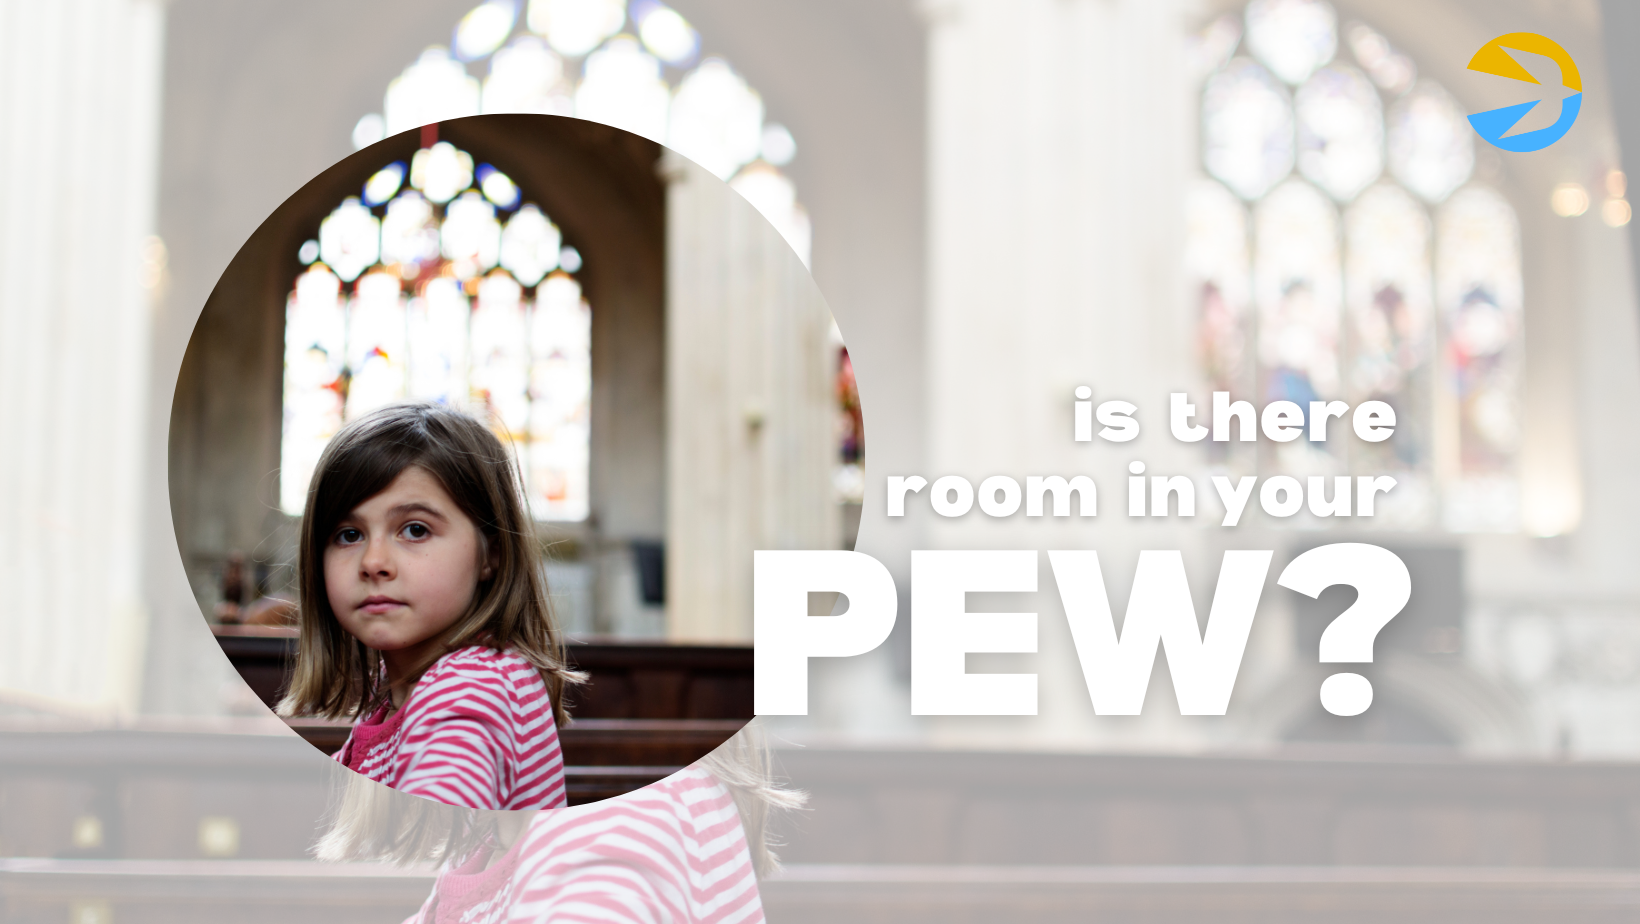 A young girl in a red and white striped shirt sits inside a church pew with stained glass windows in the background. Text overlay reads "Is there room in your pew?" in white letters. A logo featuring a blue and yellow design appears in the top right corner.